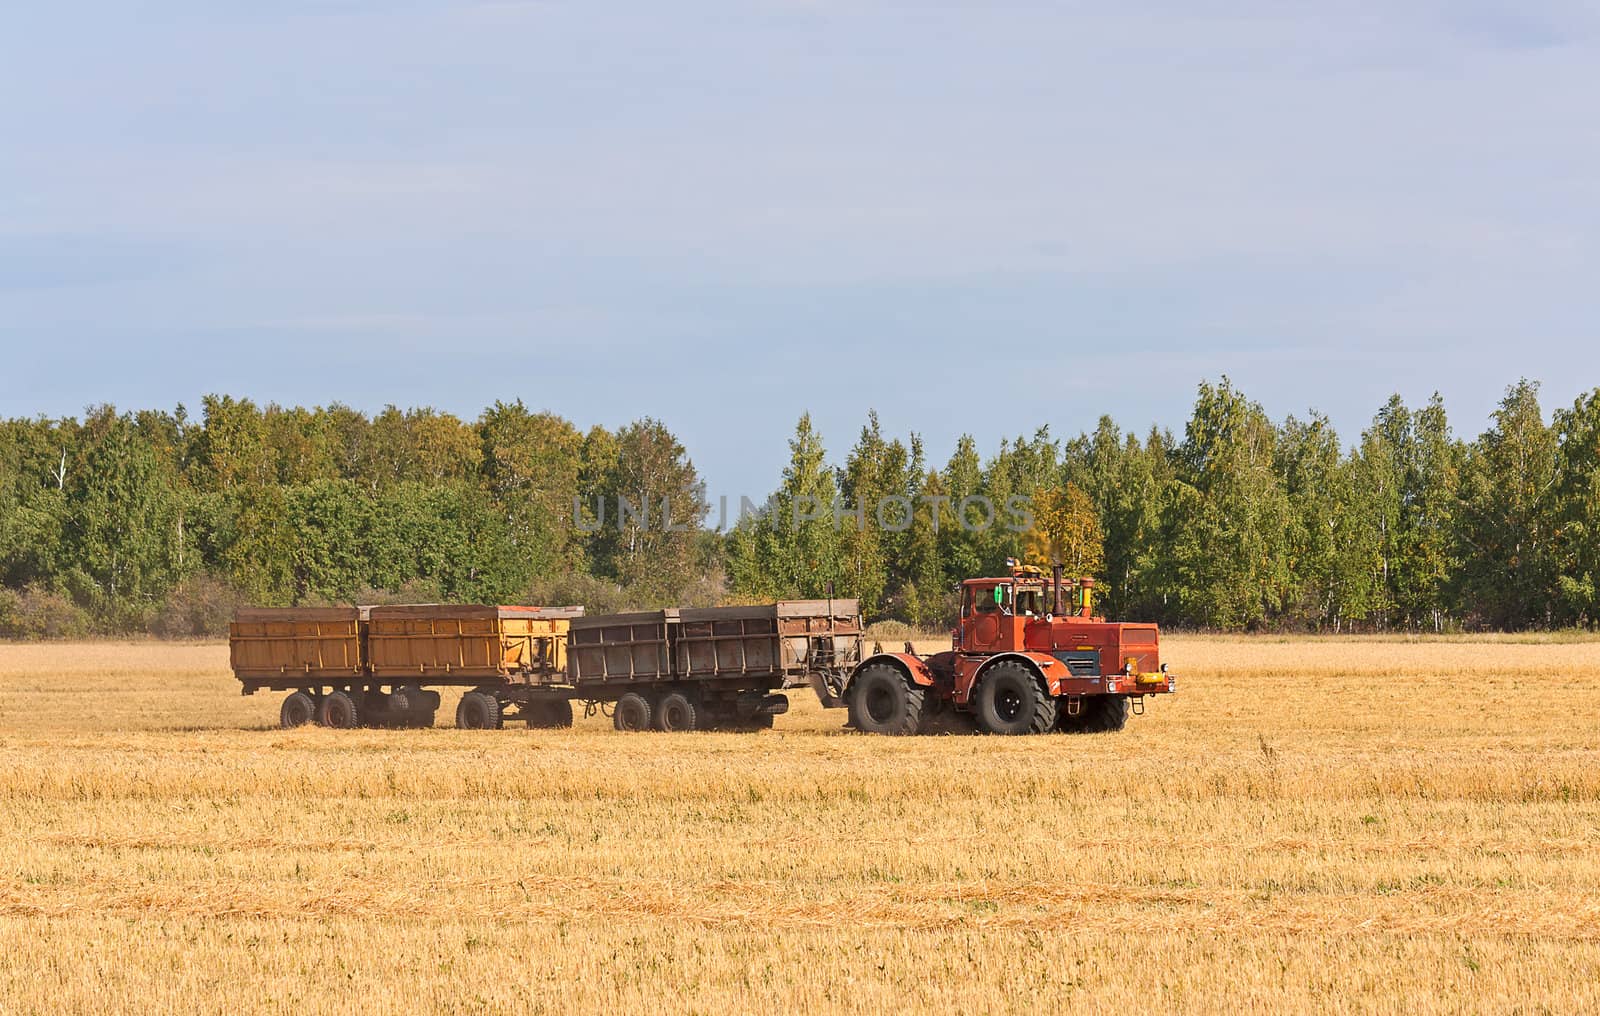 Tractor with trailer moves on field. Harvesting, Russia.